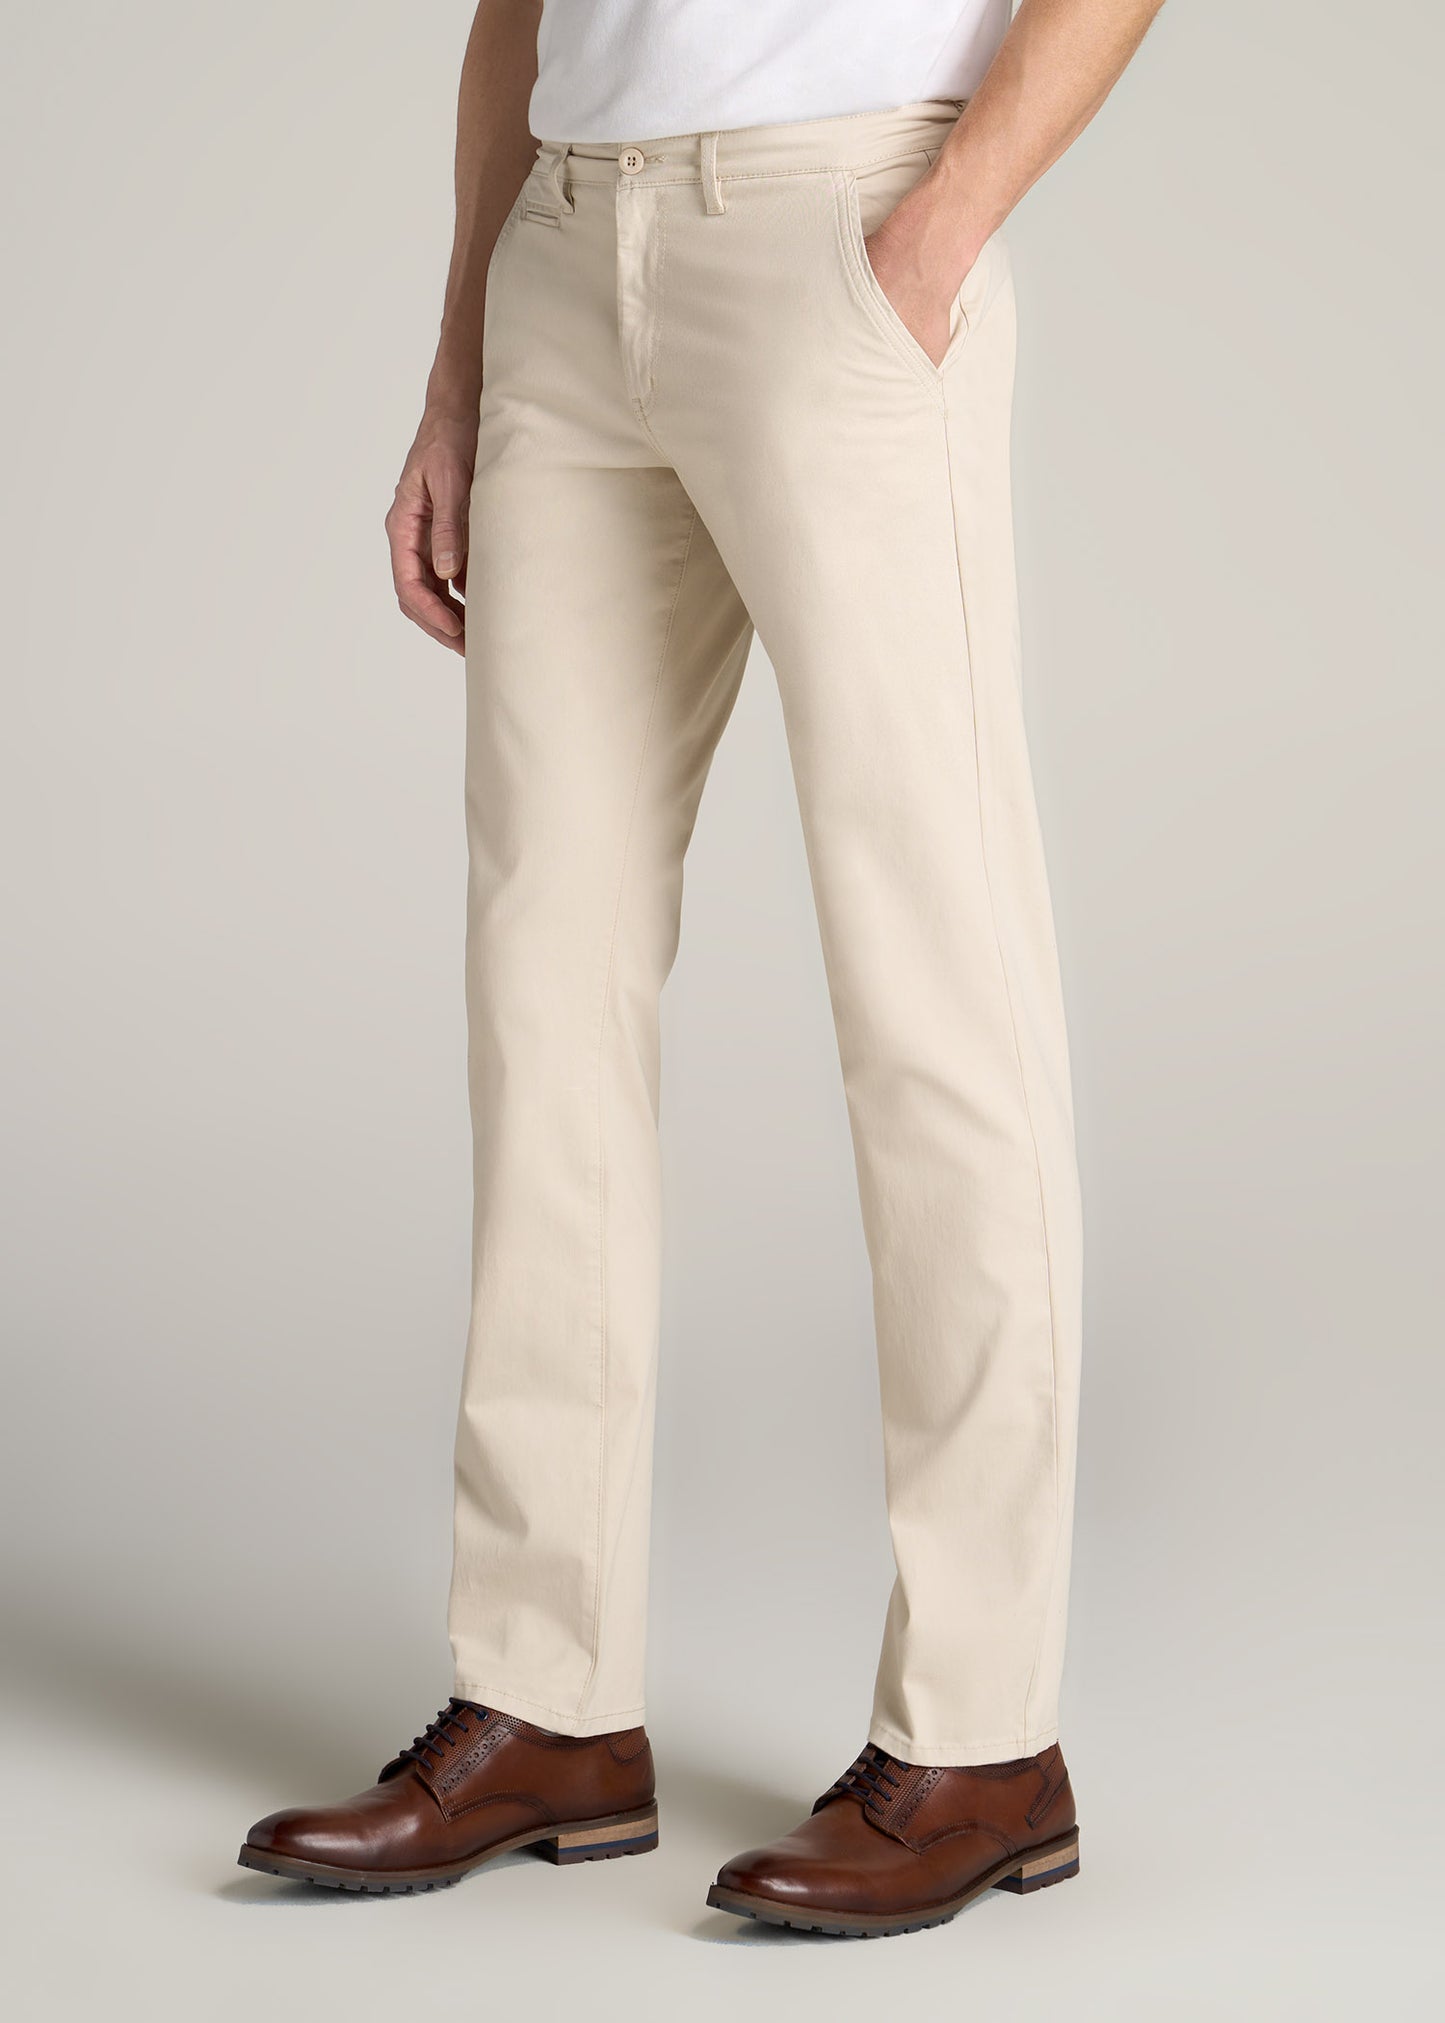 American-Tall-Men-Carman-Tapered-Fit-Chino-Pant-Soft-Beige-side